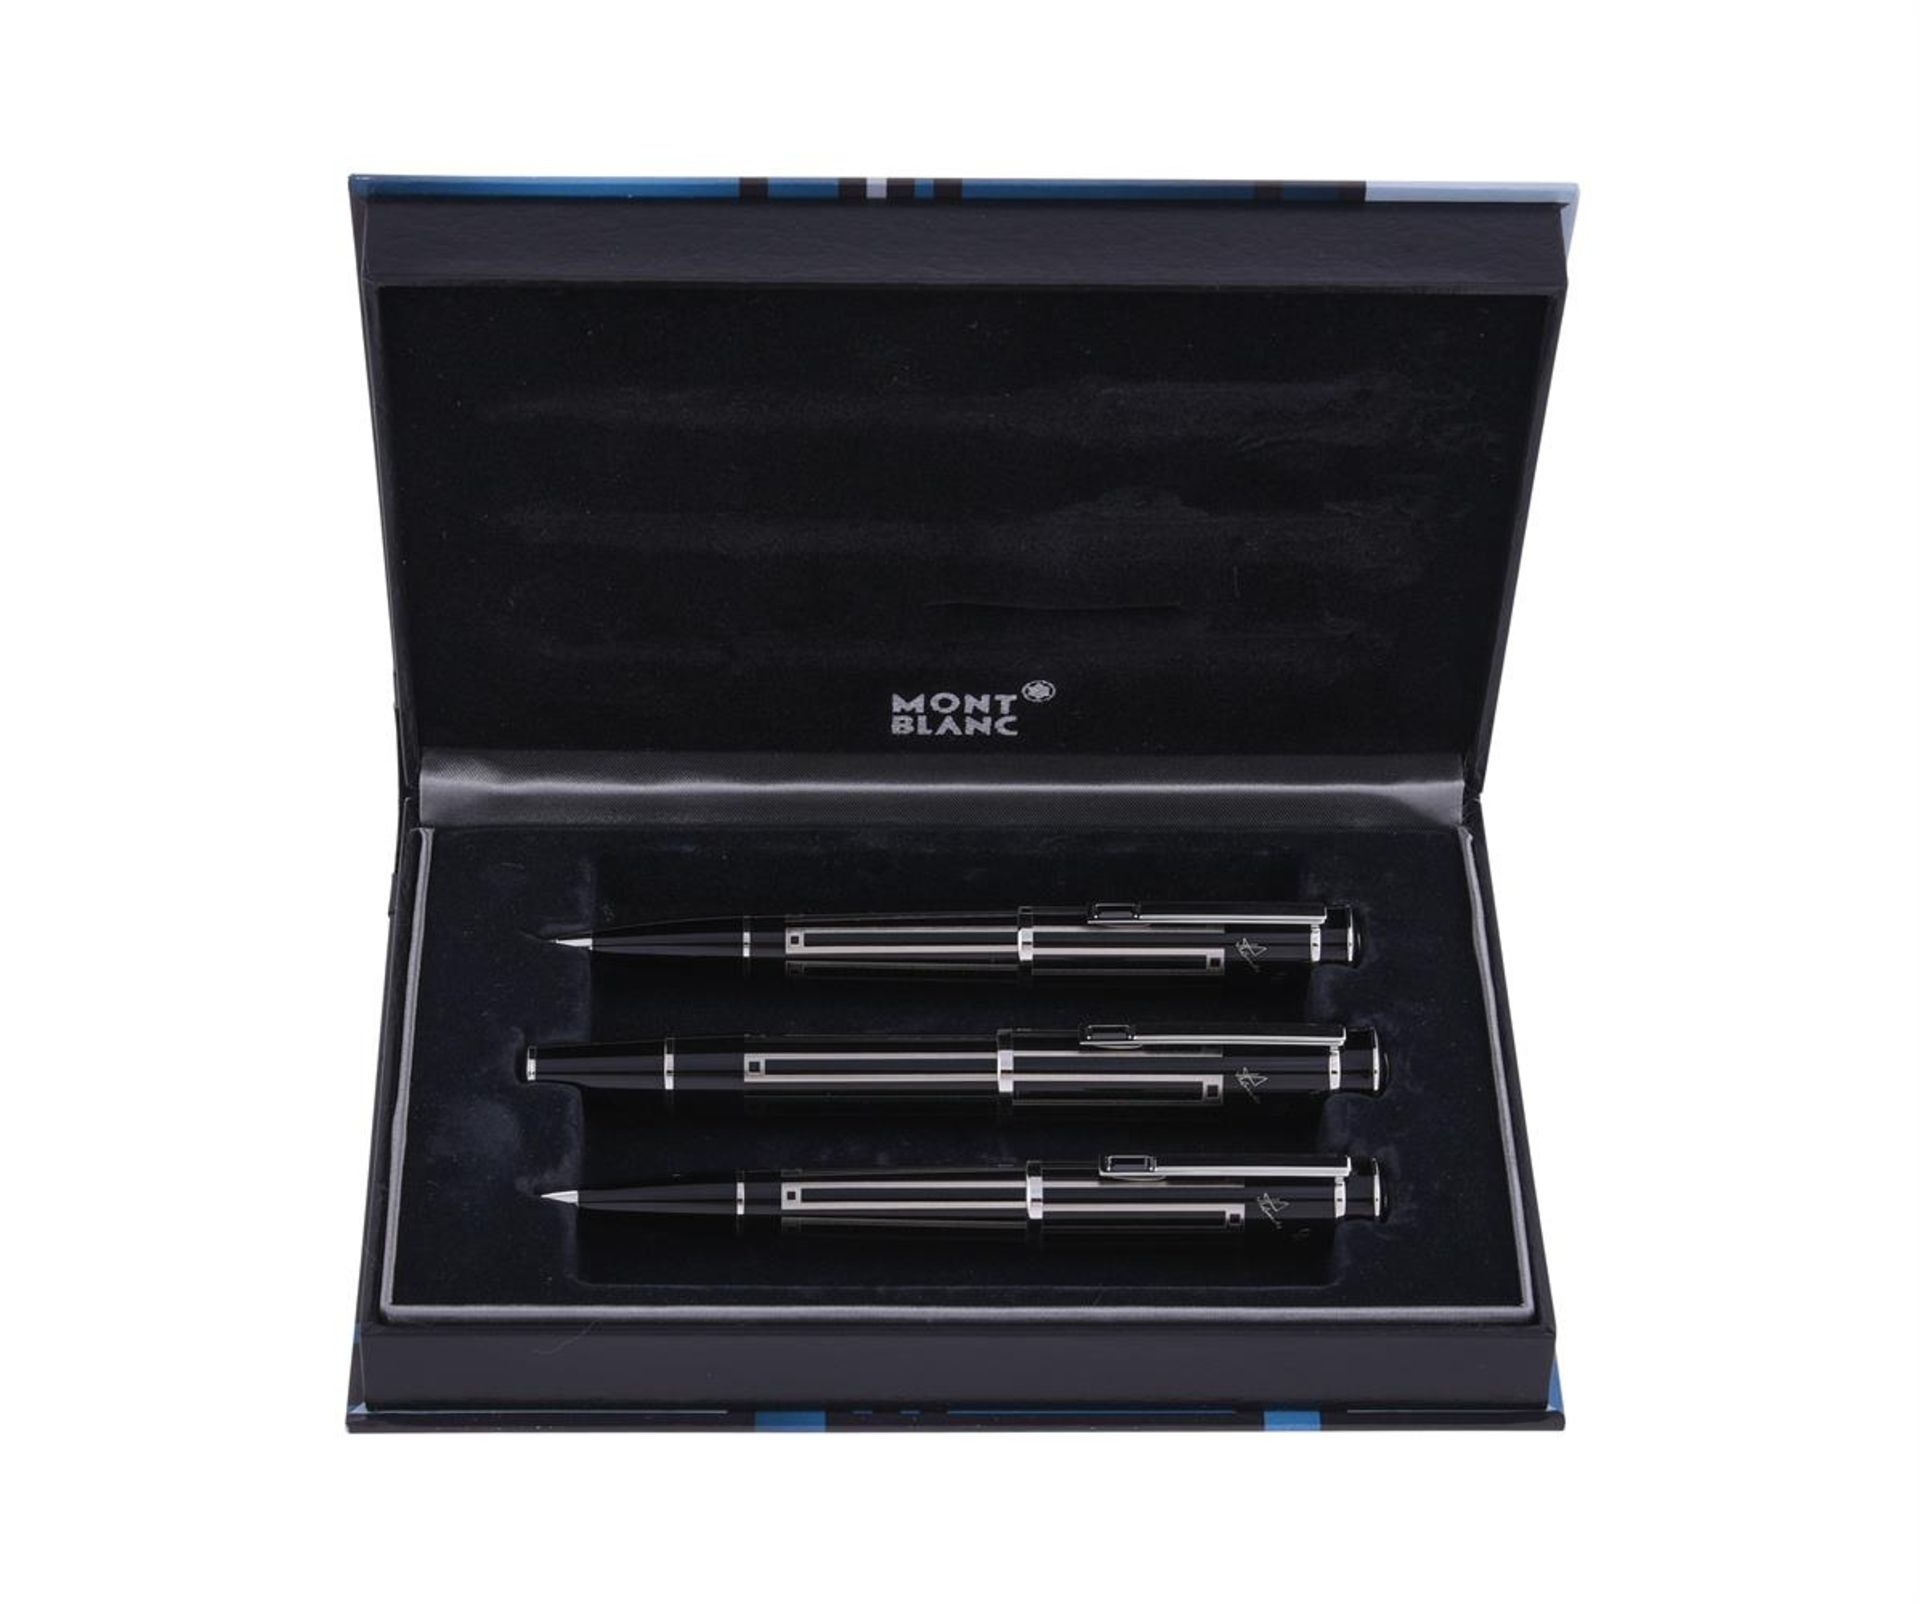 MONTBLANC, WRITERS EDITION, THOMAS MANN, A LIMITED EDITION THREE PIECE SET - Image 3 of 3